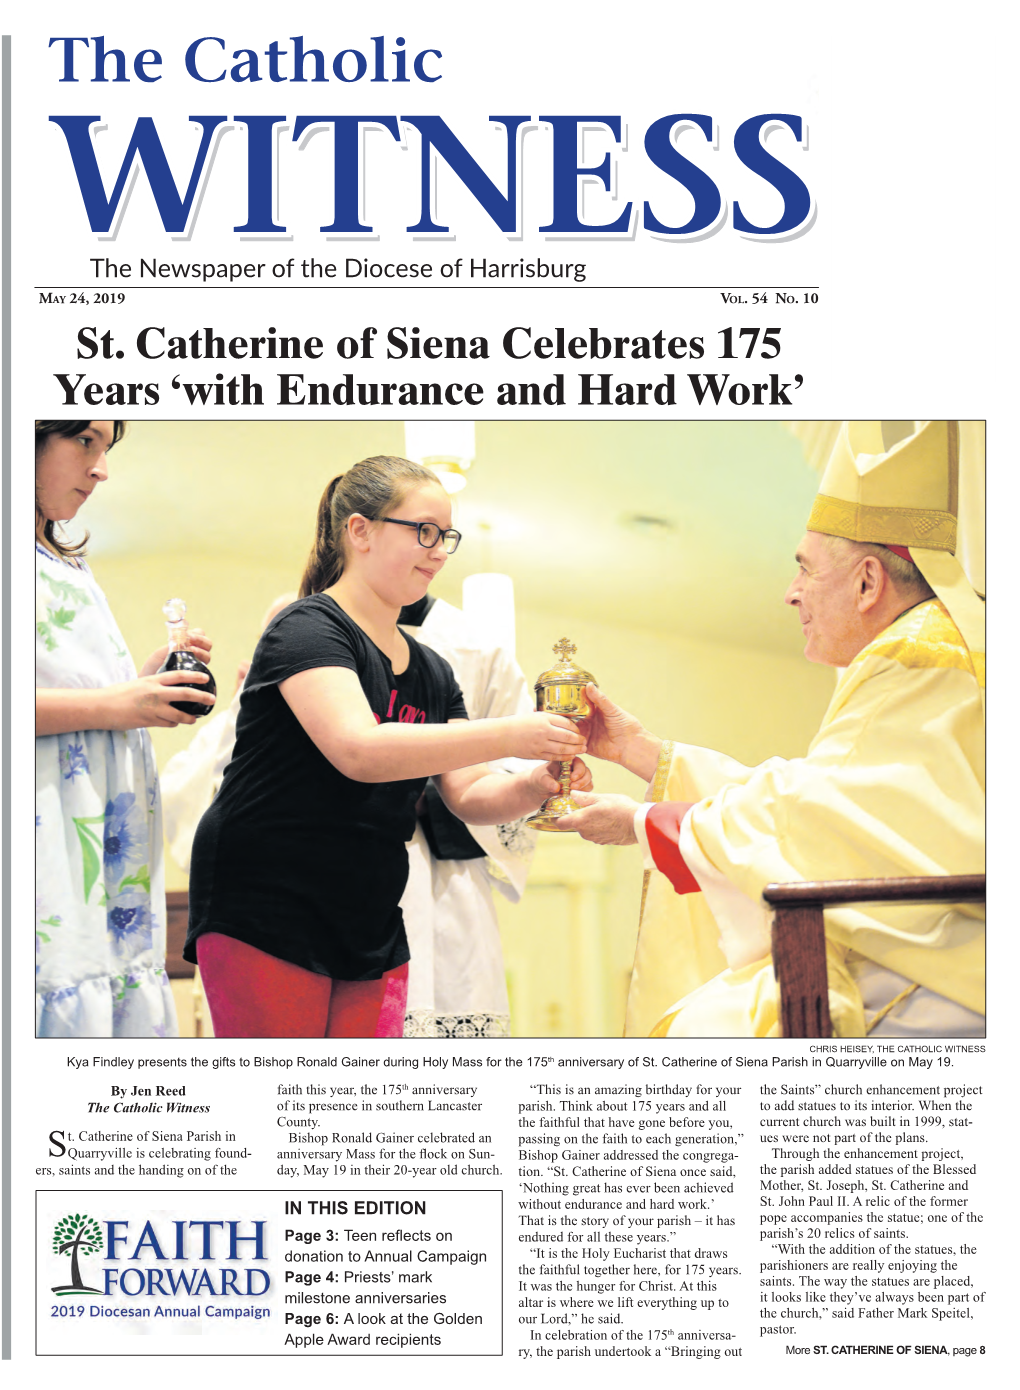 The Catholic WITNESSWITNESS the Newspaper of the Diocese of Harrisburg May 24, 2019 Vol